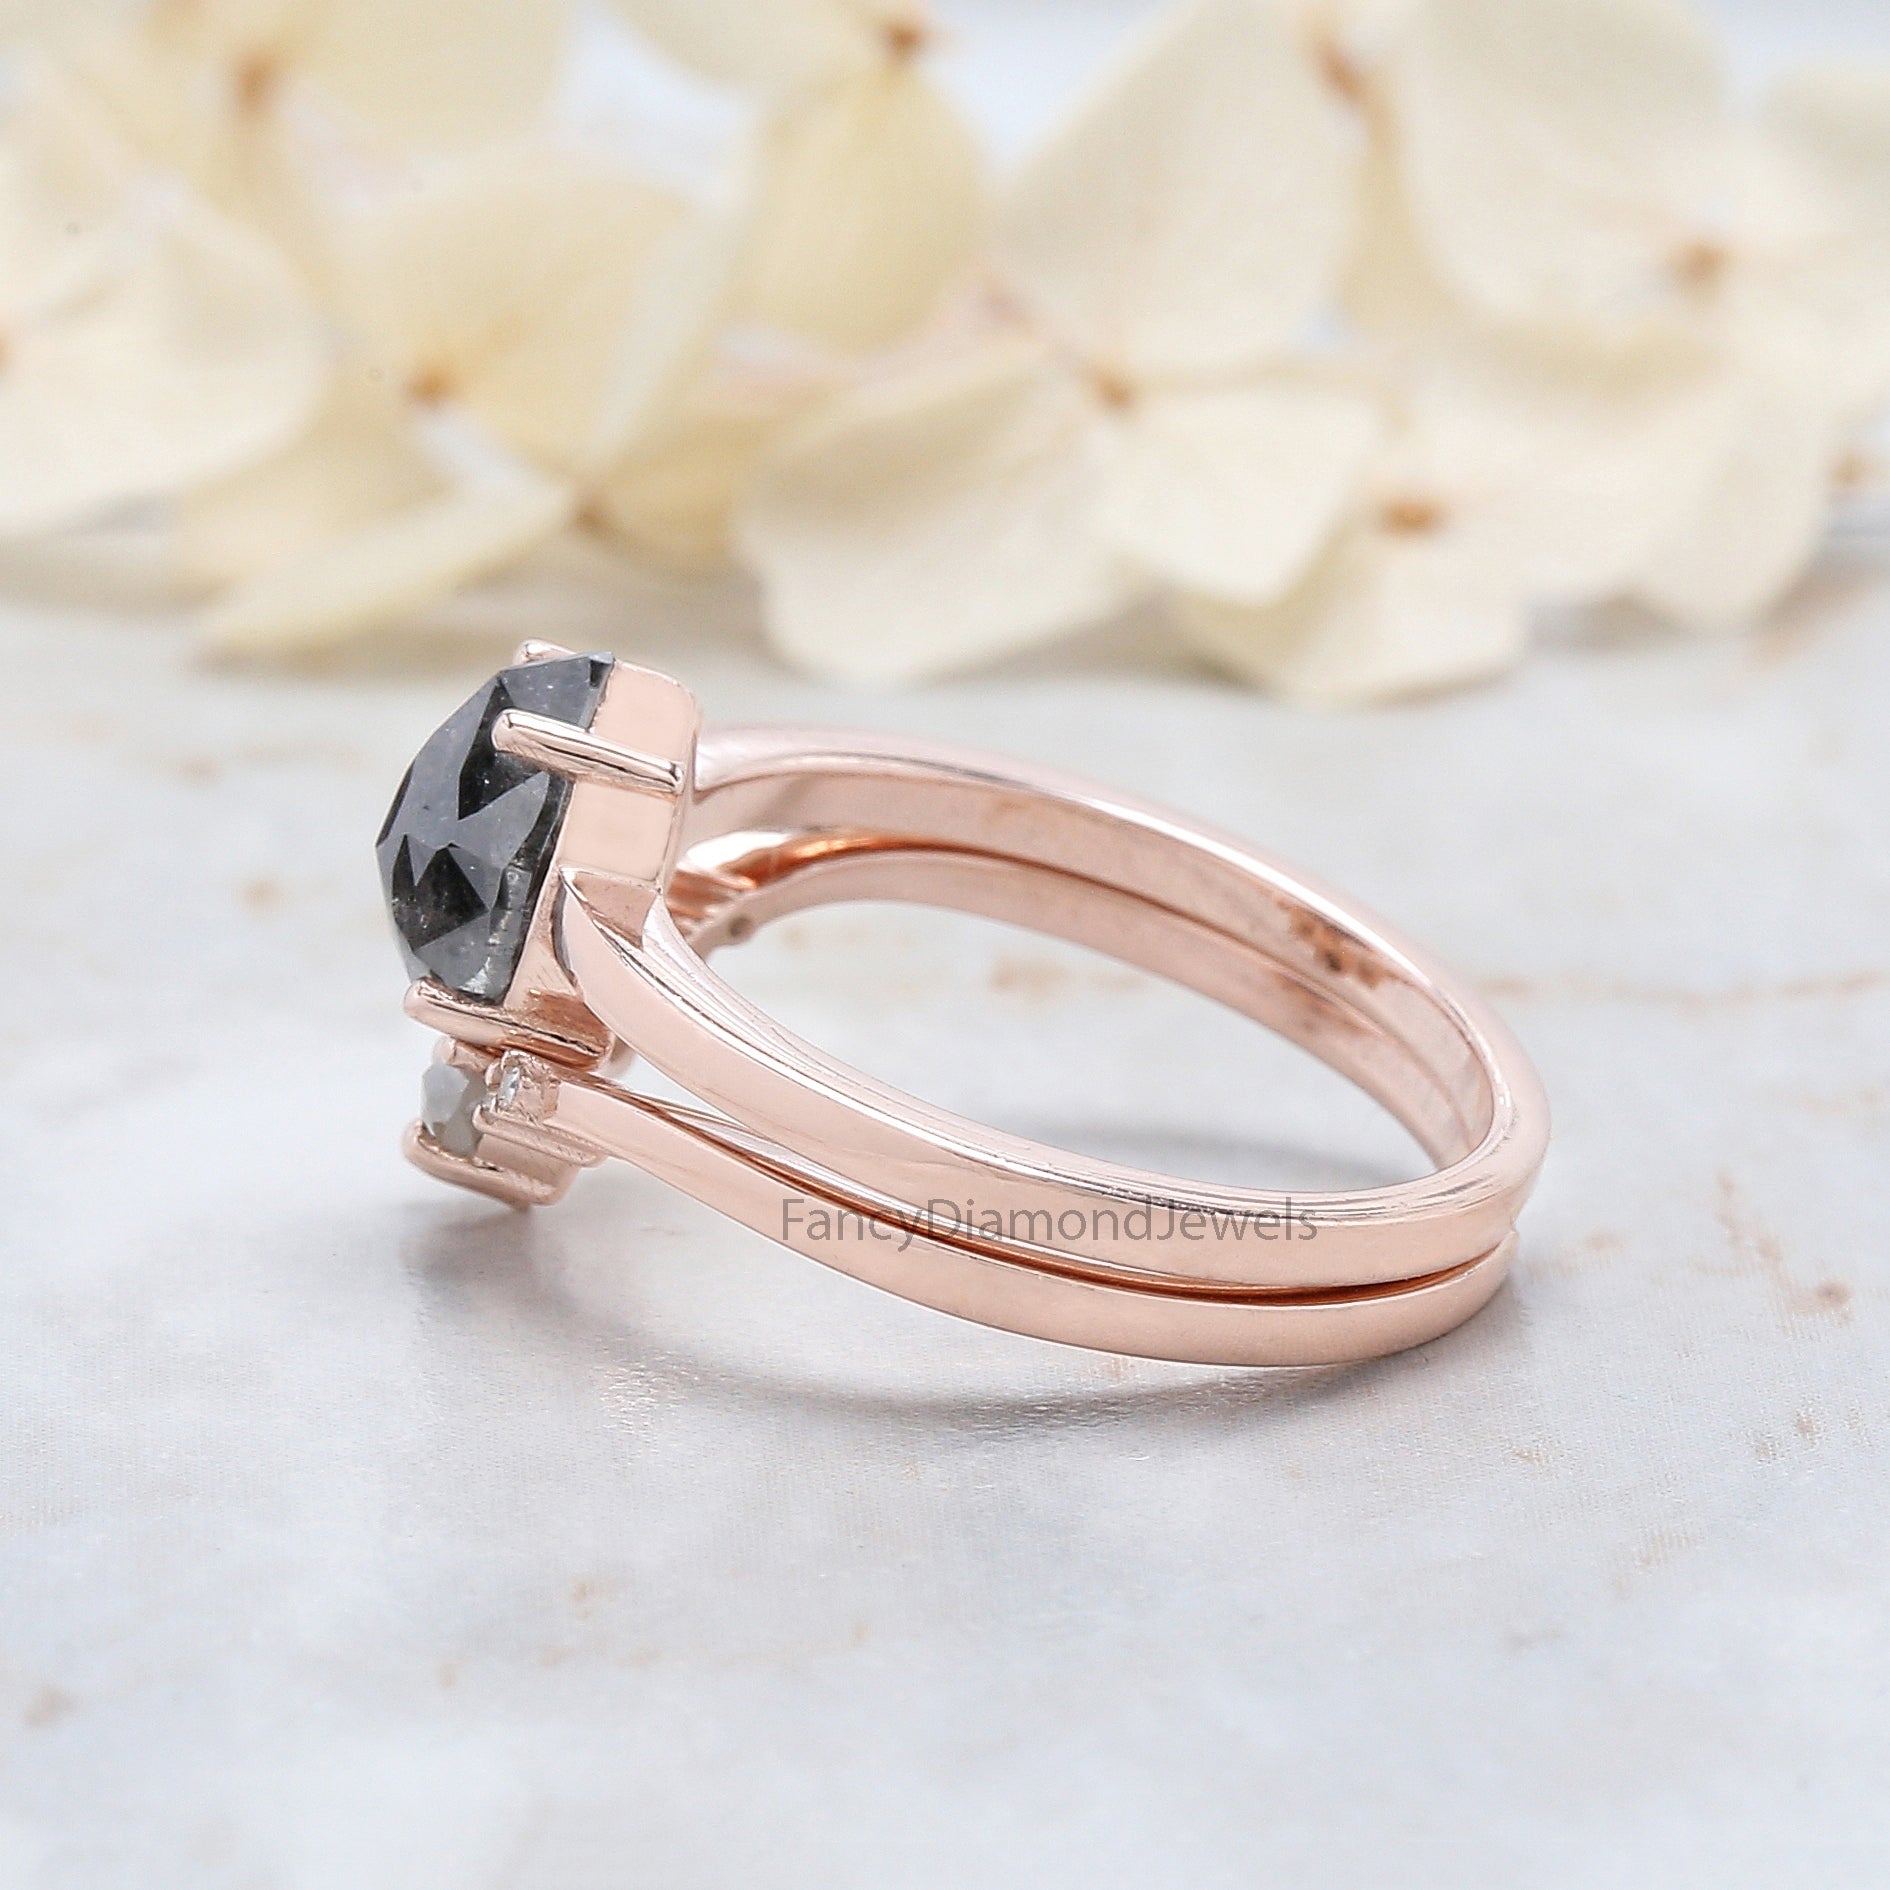 Pear Cut Salt And Pepper Diamond Ring 1.47 Ct 8.05 MM Pear Diamond Ring 14K Solid Rose Gold Silver Pear Engagement Ring Gift For Her QL1561